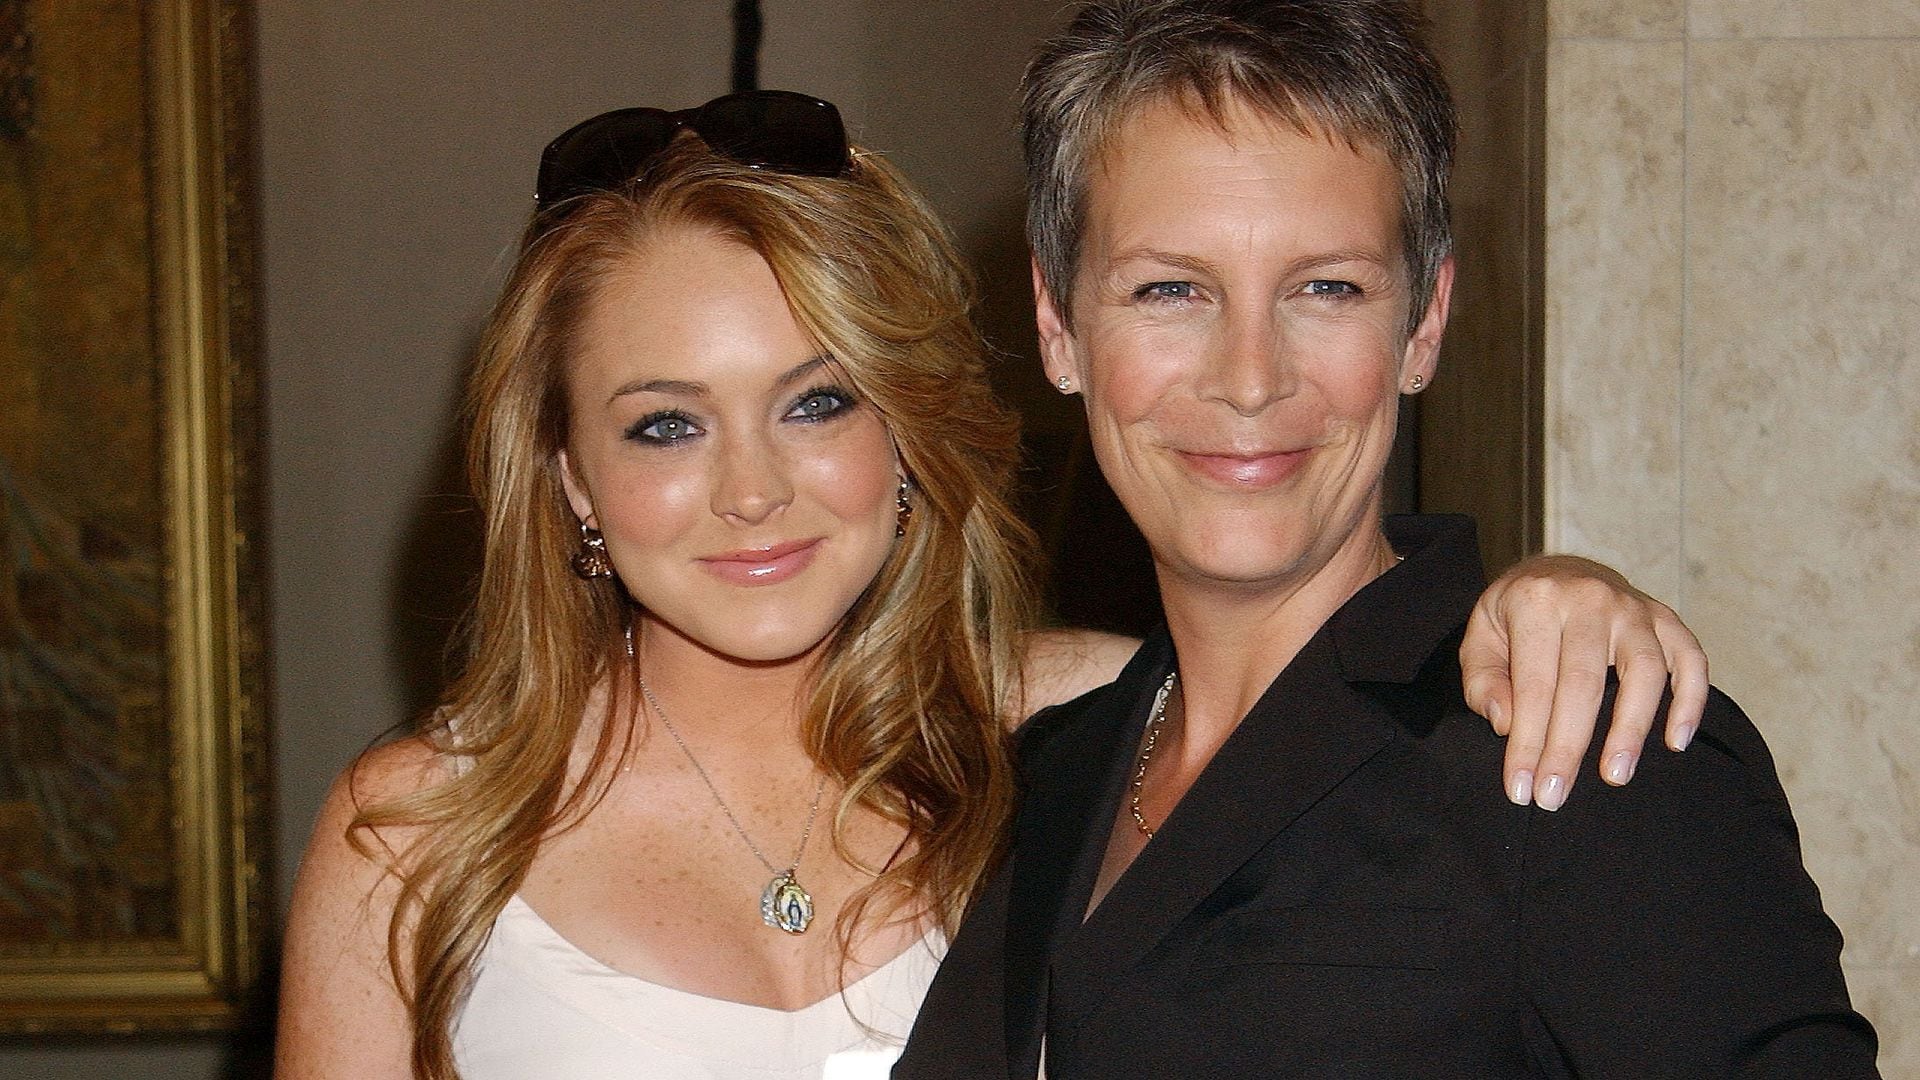 Jamie Lee Curtis and Lindsay Lohan begin production of 'Freaky Friday' sequel [PHOTO]